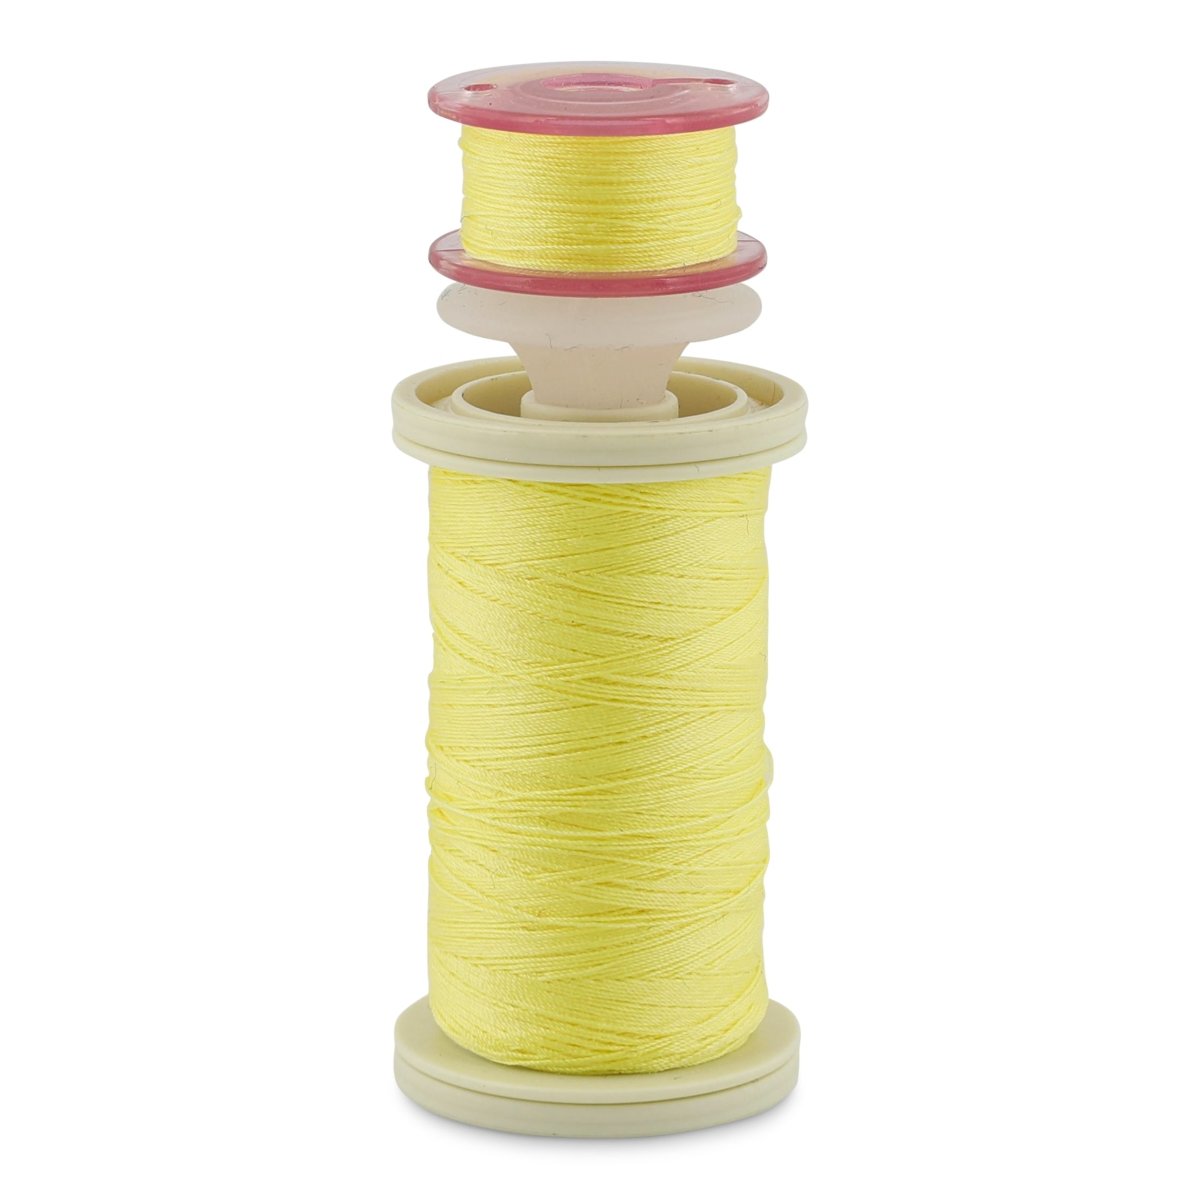 a spool with yellow thread, a bobbin with yellow thread, held together with a bobbin holder